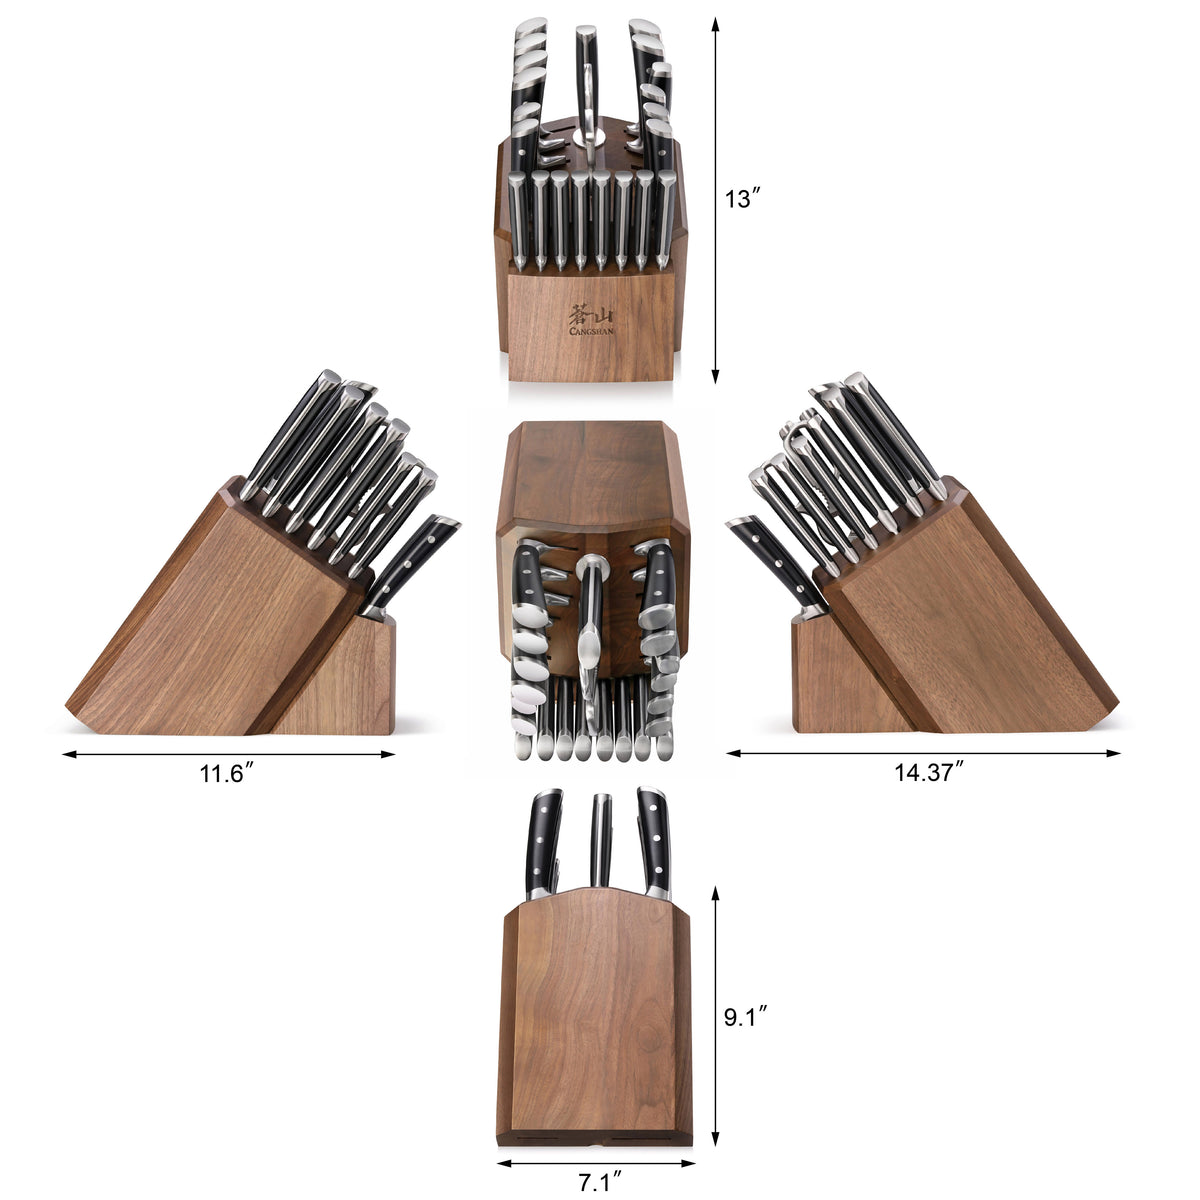 S & S1 Series 2-Piece Cleaver Knife Set, Forged German Steel – Cangshan  Cutlery Company